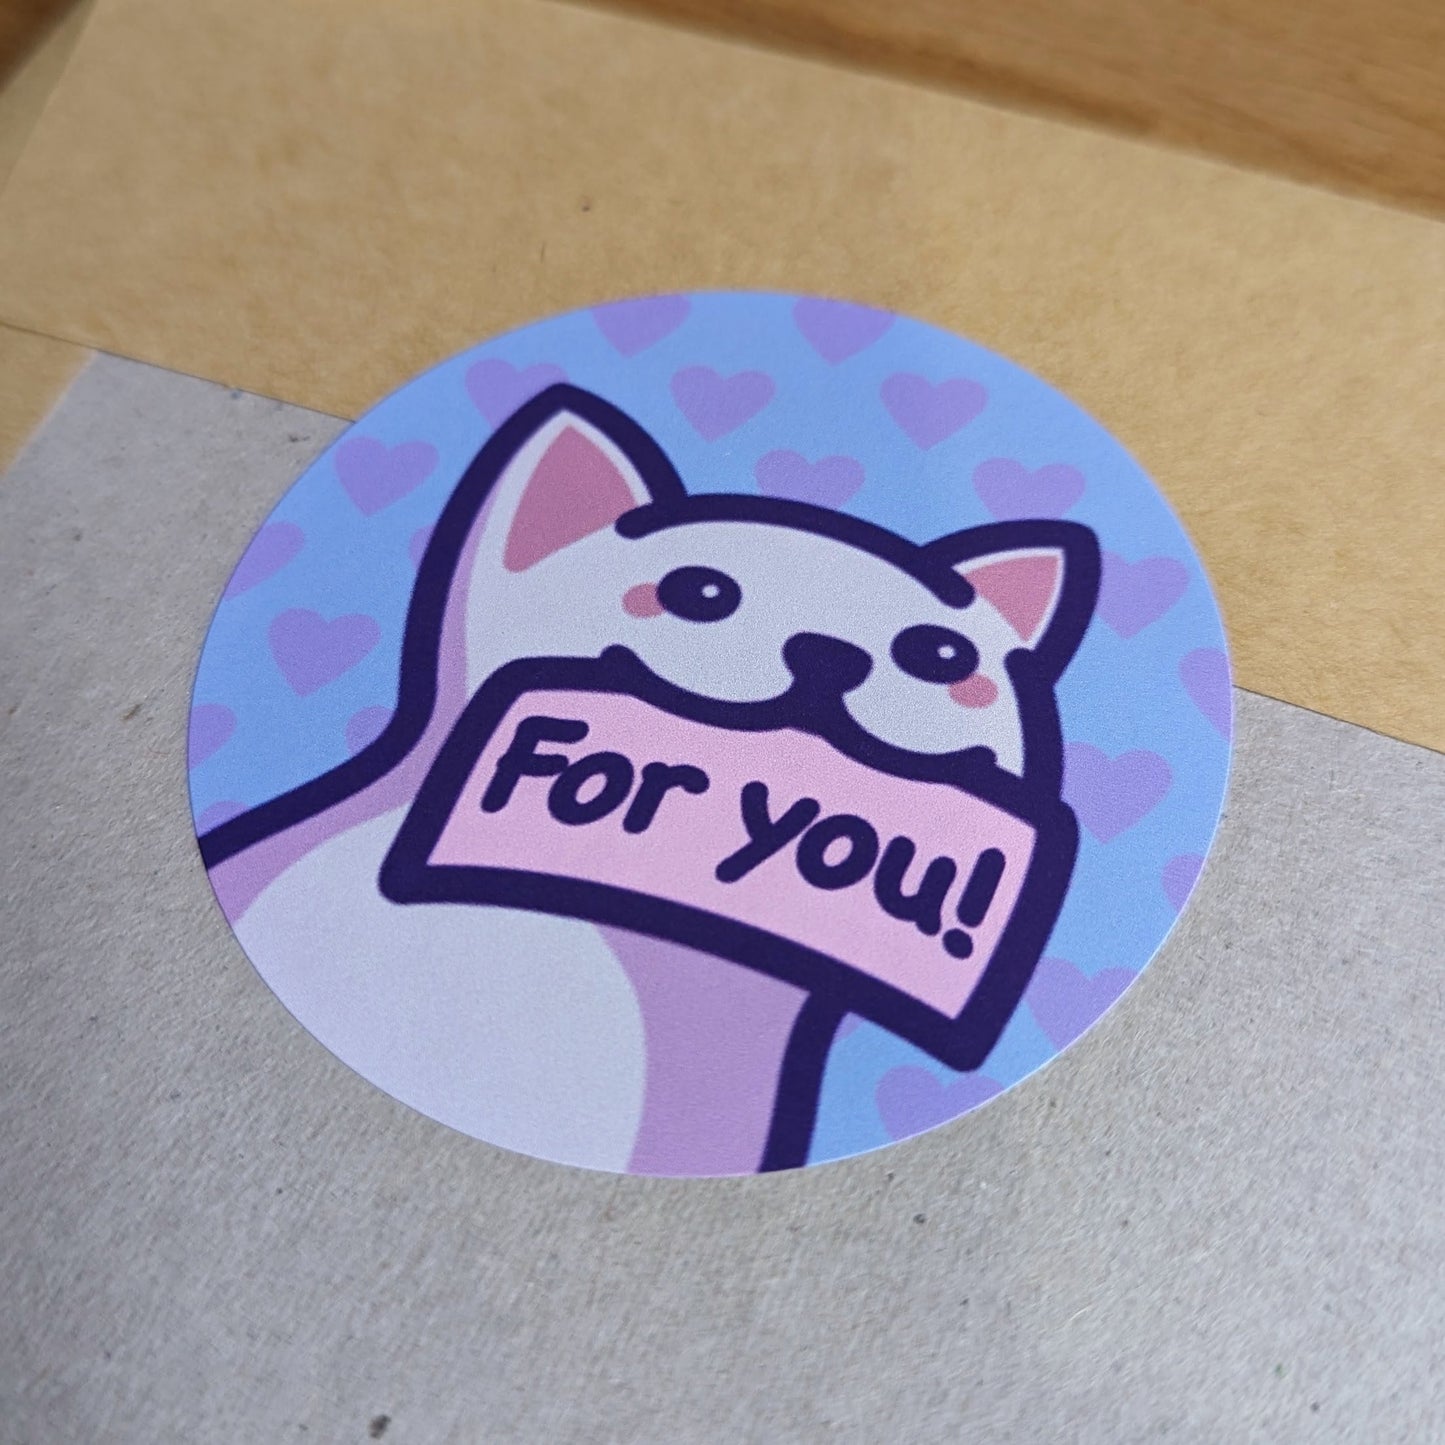 Cute Packaging Sticker Set | "For You" Envelope or Gift Seal